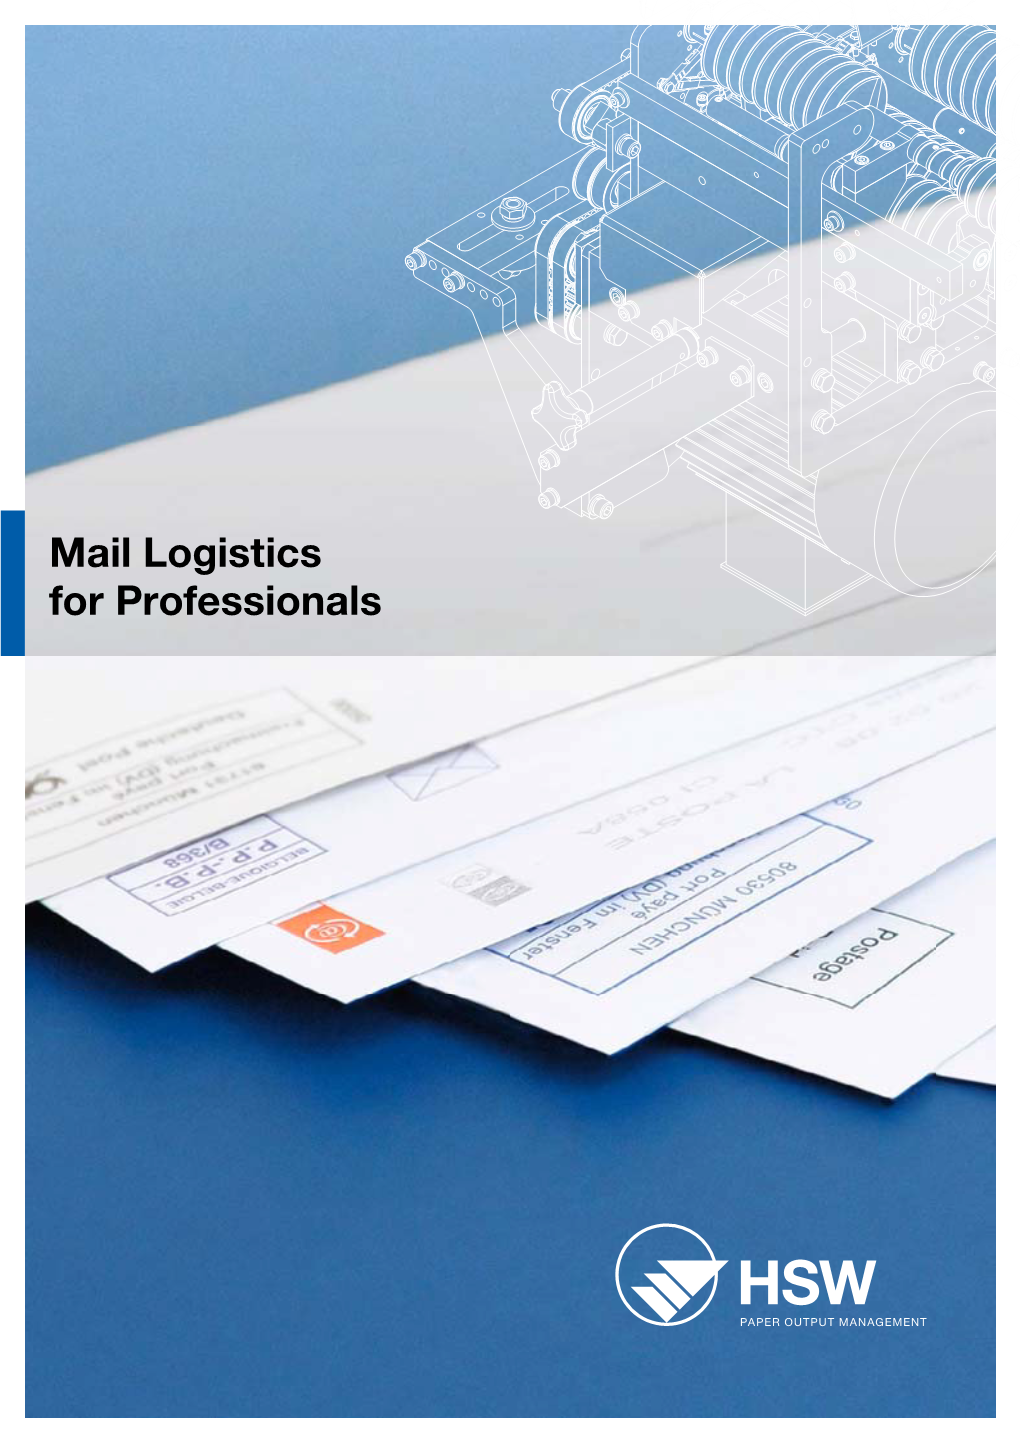 Mail Logistics for Professionals Open to Everything